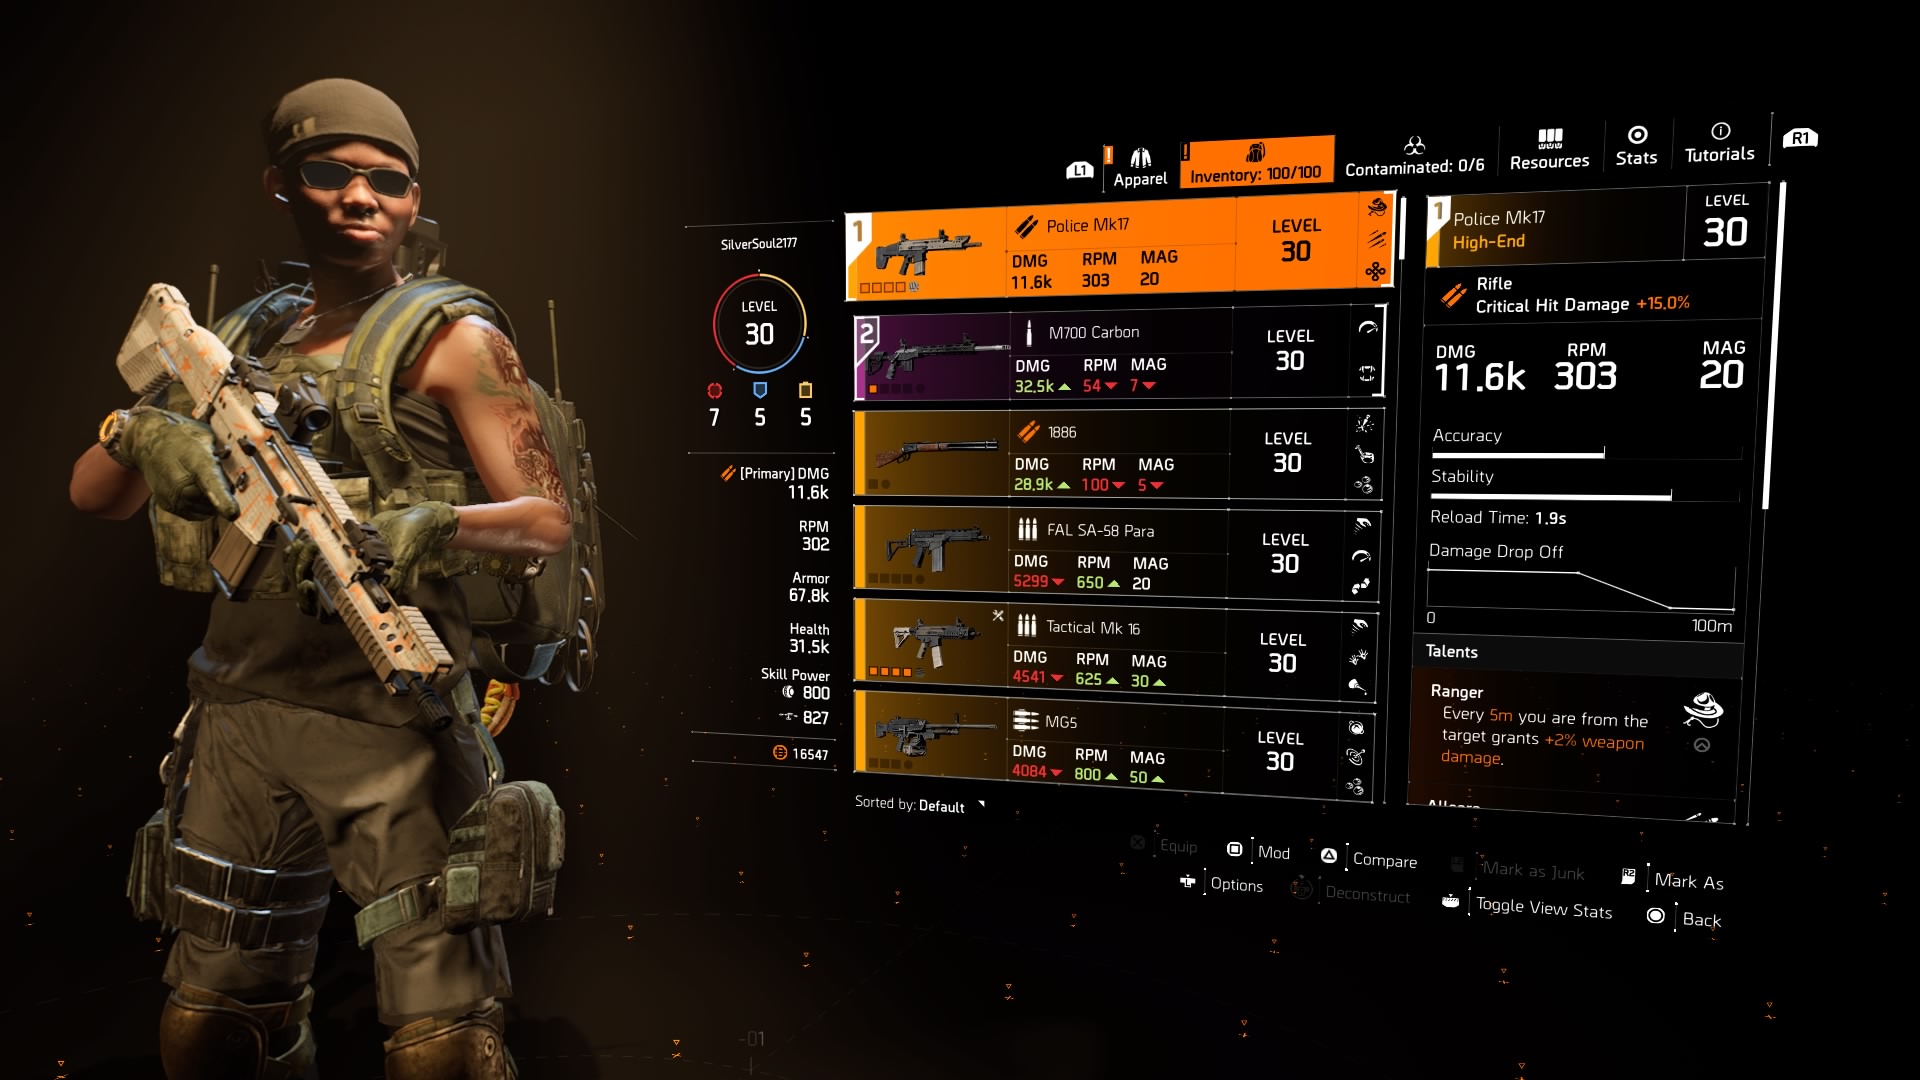 [Top 10] The Division 2 Best Weapons and How To Get Them GAMERS DECIDE